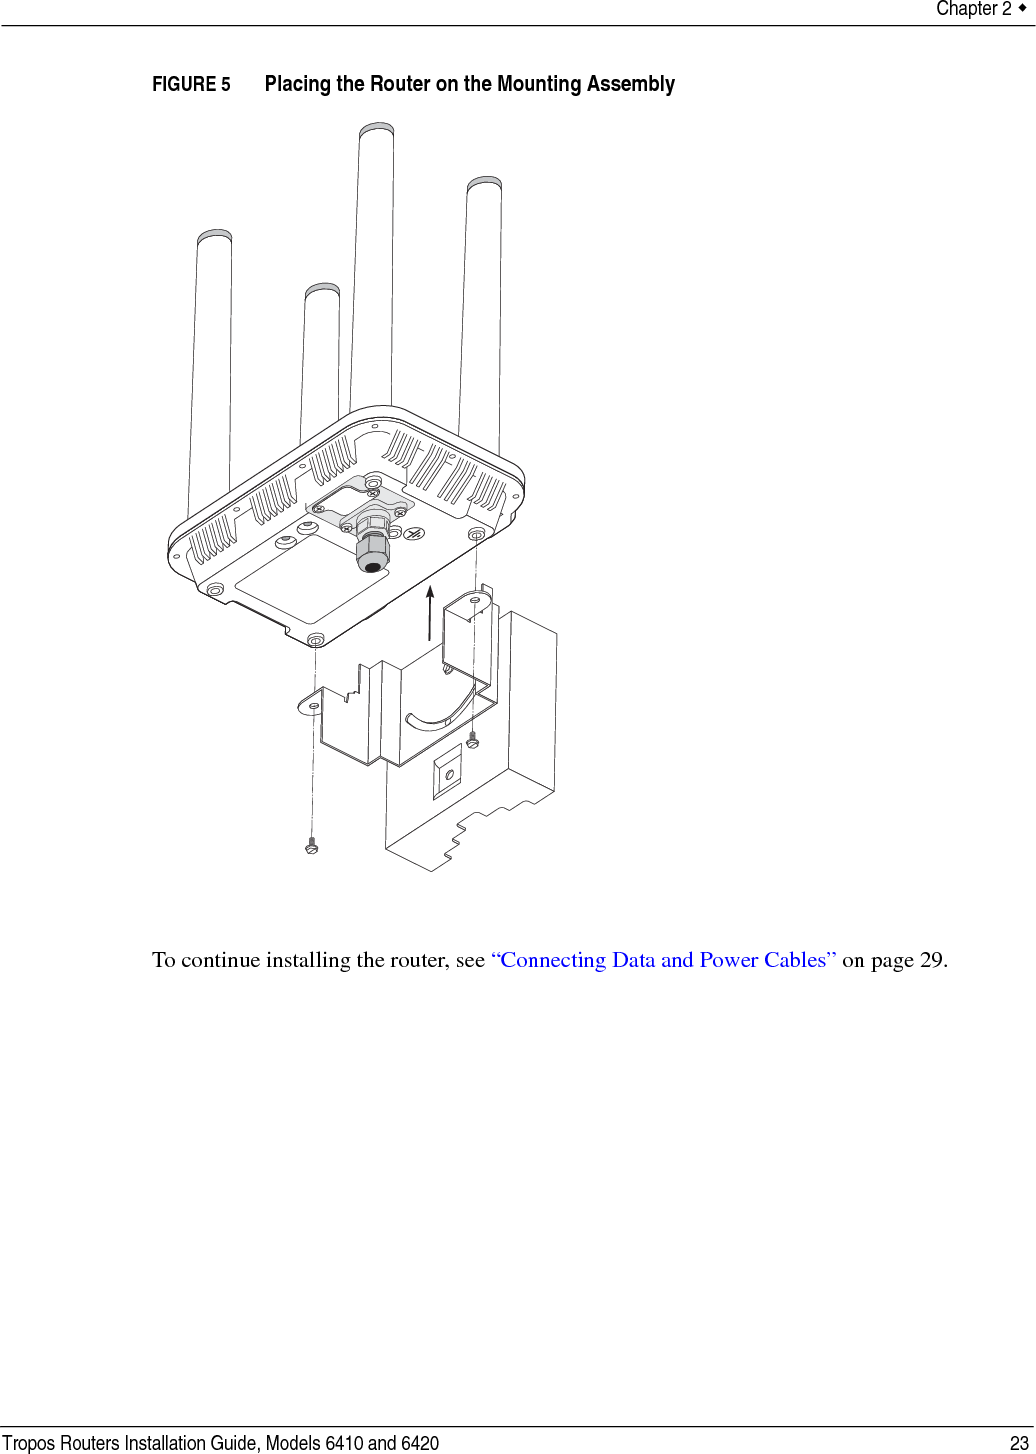 Chapter 2  Tropos Routers Installation Guide, Models 6410 and 6420 23FIGURE 5   Placing the Router on the Mounting AssemblyTo continue installing the router, see “Connecting Data and Power Cables” on page 29.